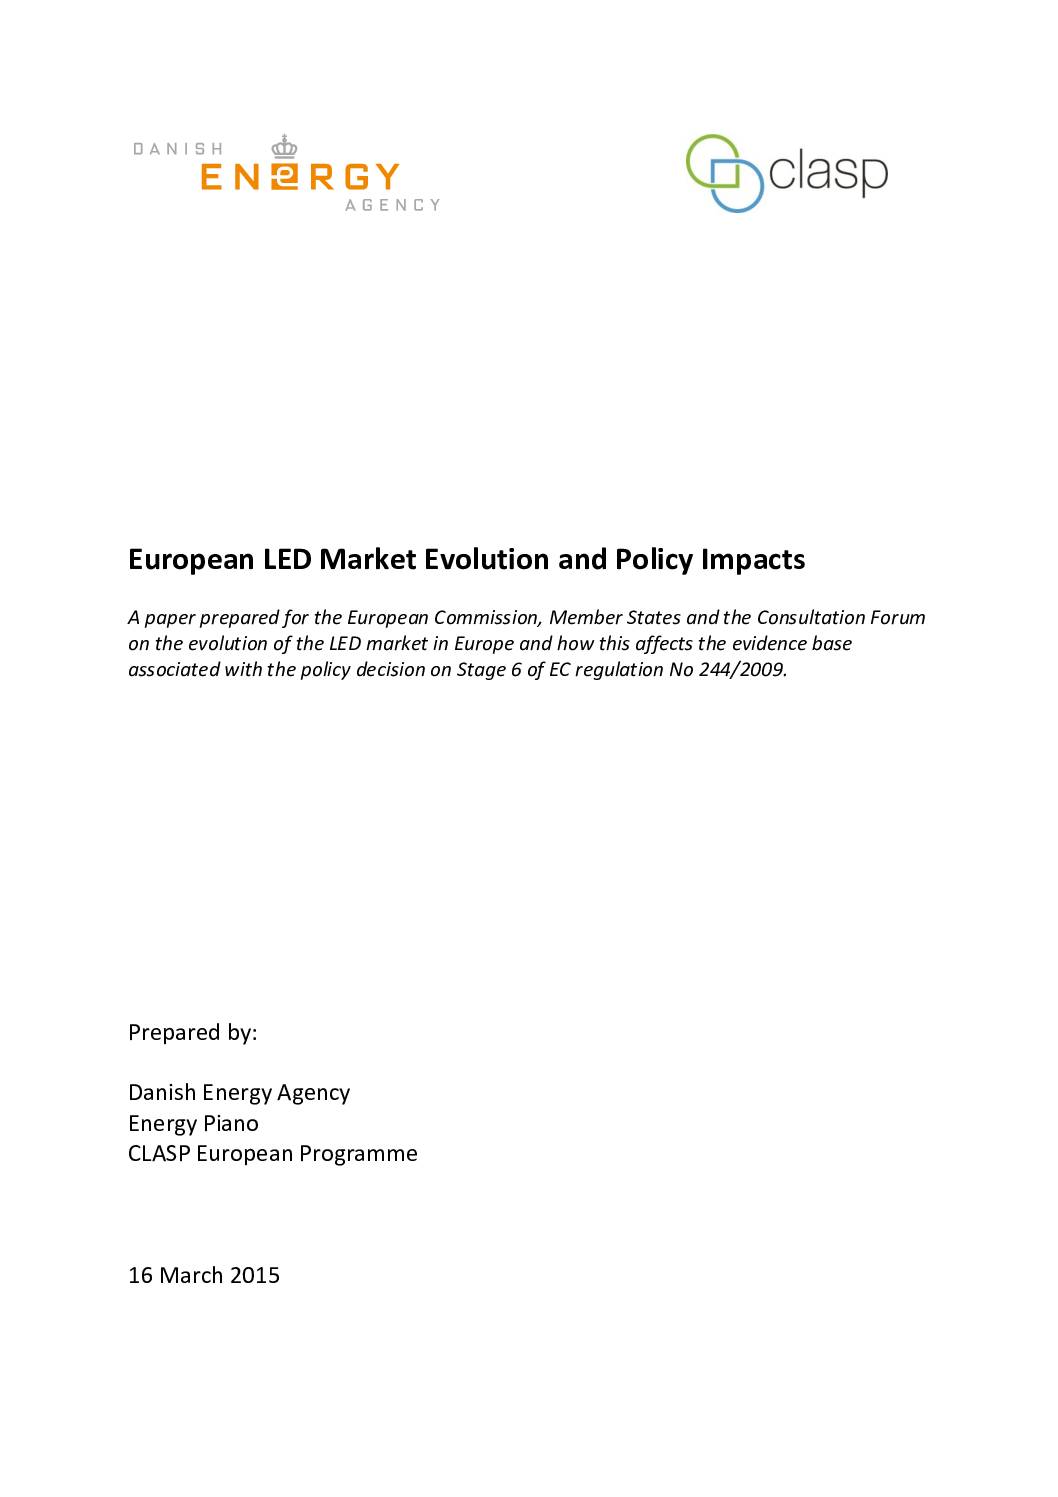 European LED Market Evolution and Policy Impacts